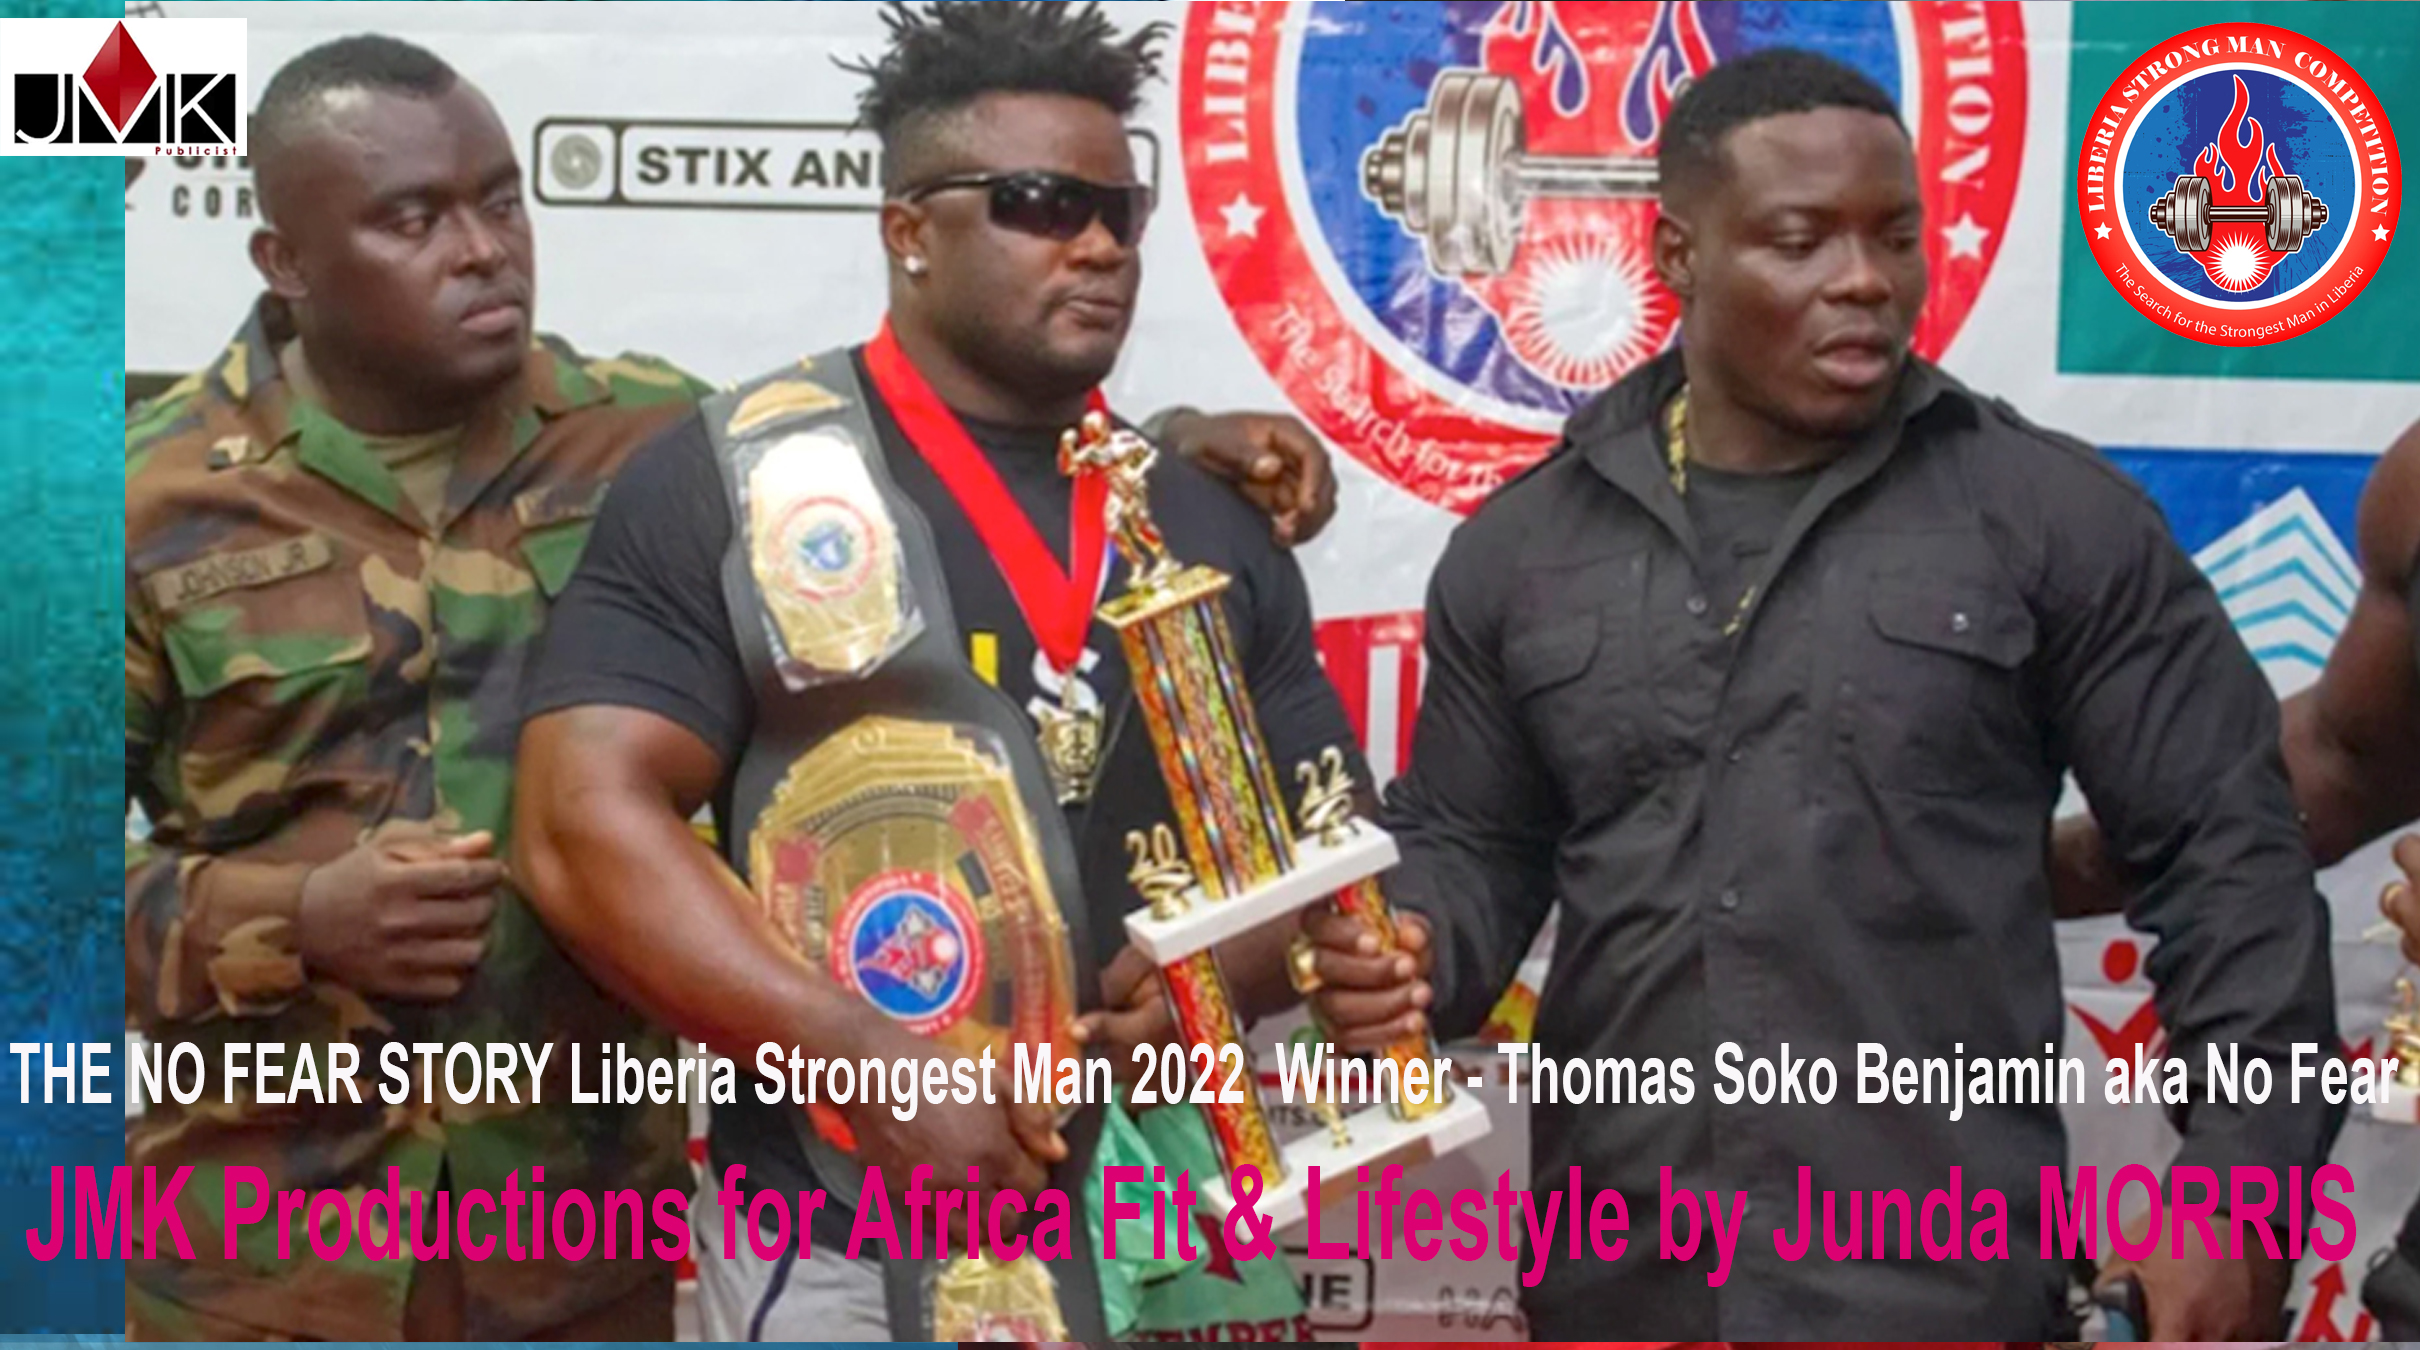 AFRICA-VOGUE-COVER-THE-NO-FEAR-STORY-Liberia-Strongest-Man-2022 -Winner-Thomas-Soko-Benjamin-aka-No-Fear-JMK-Productions-for-Africa-Fit-&-Lifestyle-by-Junda-MORRIS-DN-AFRICA-MEDIA-PARTNER